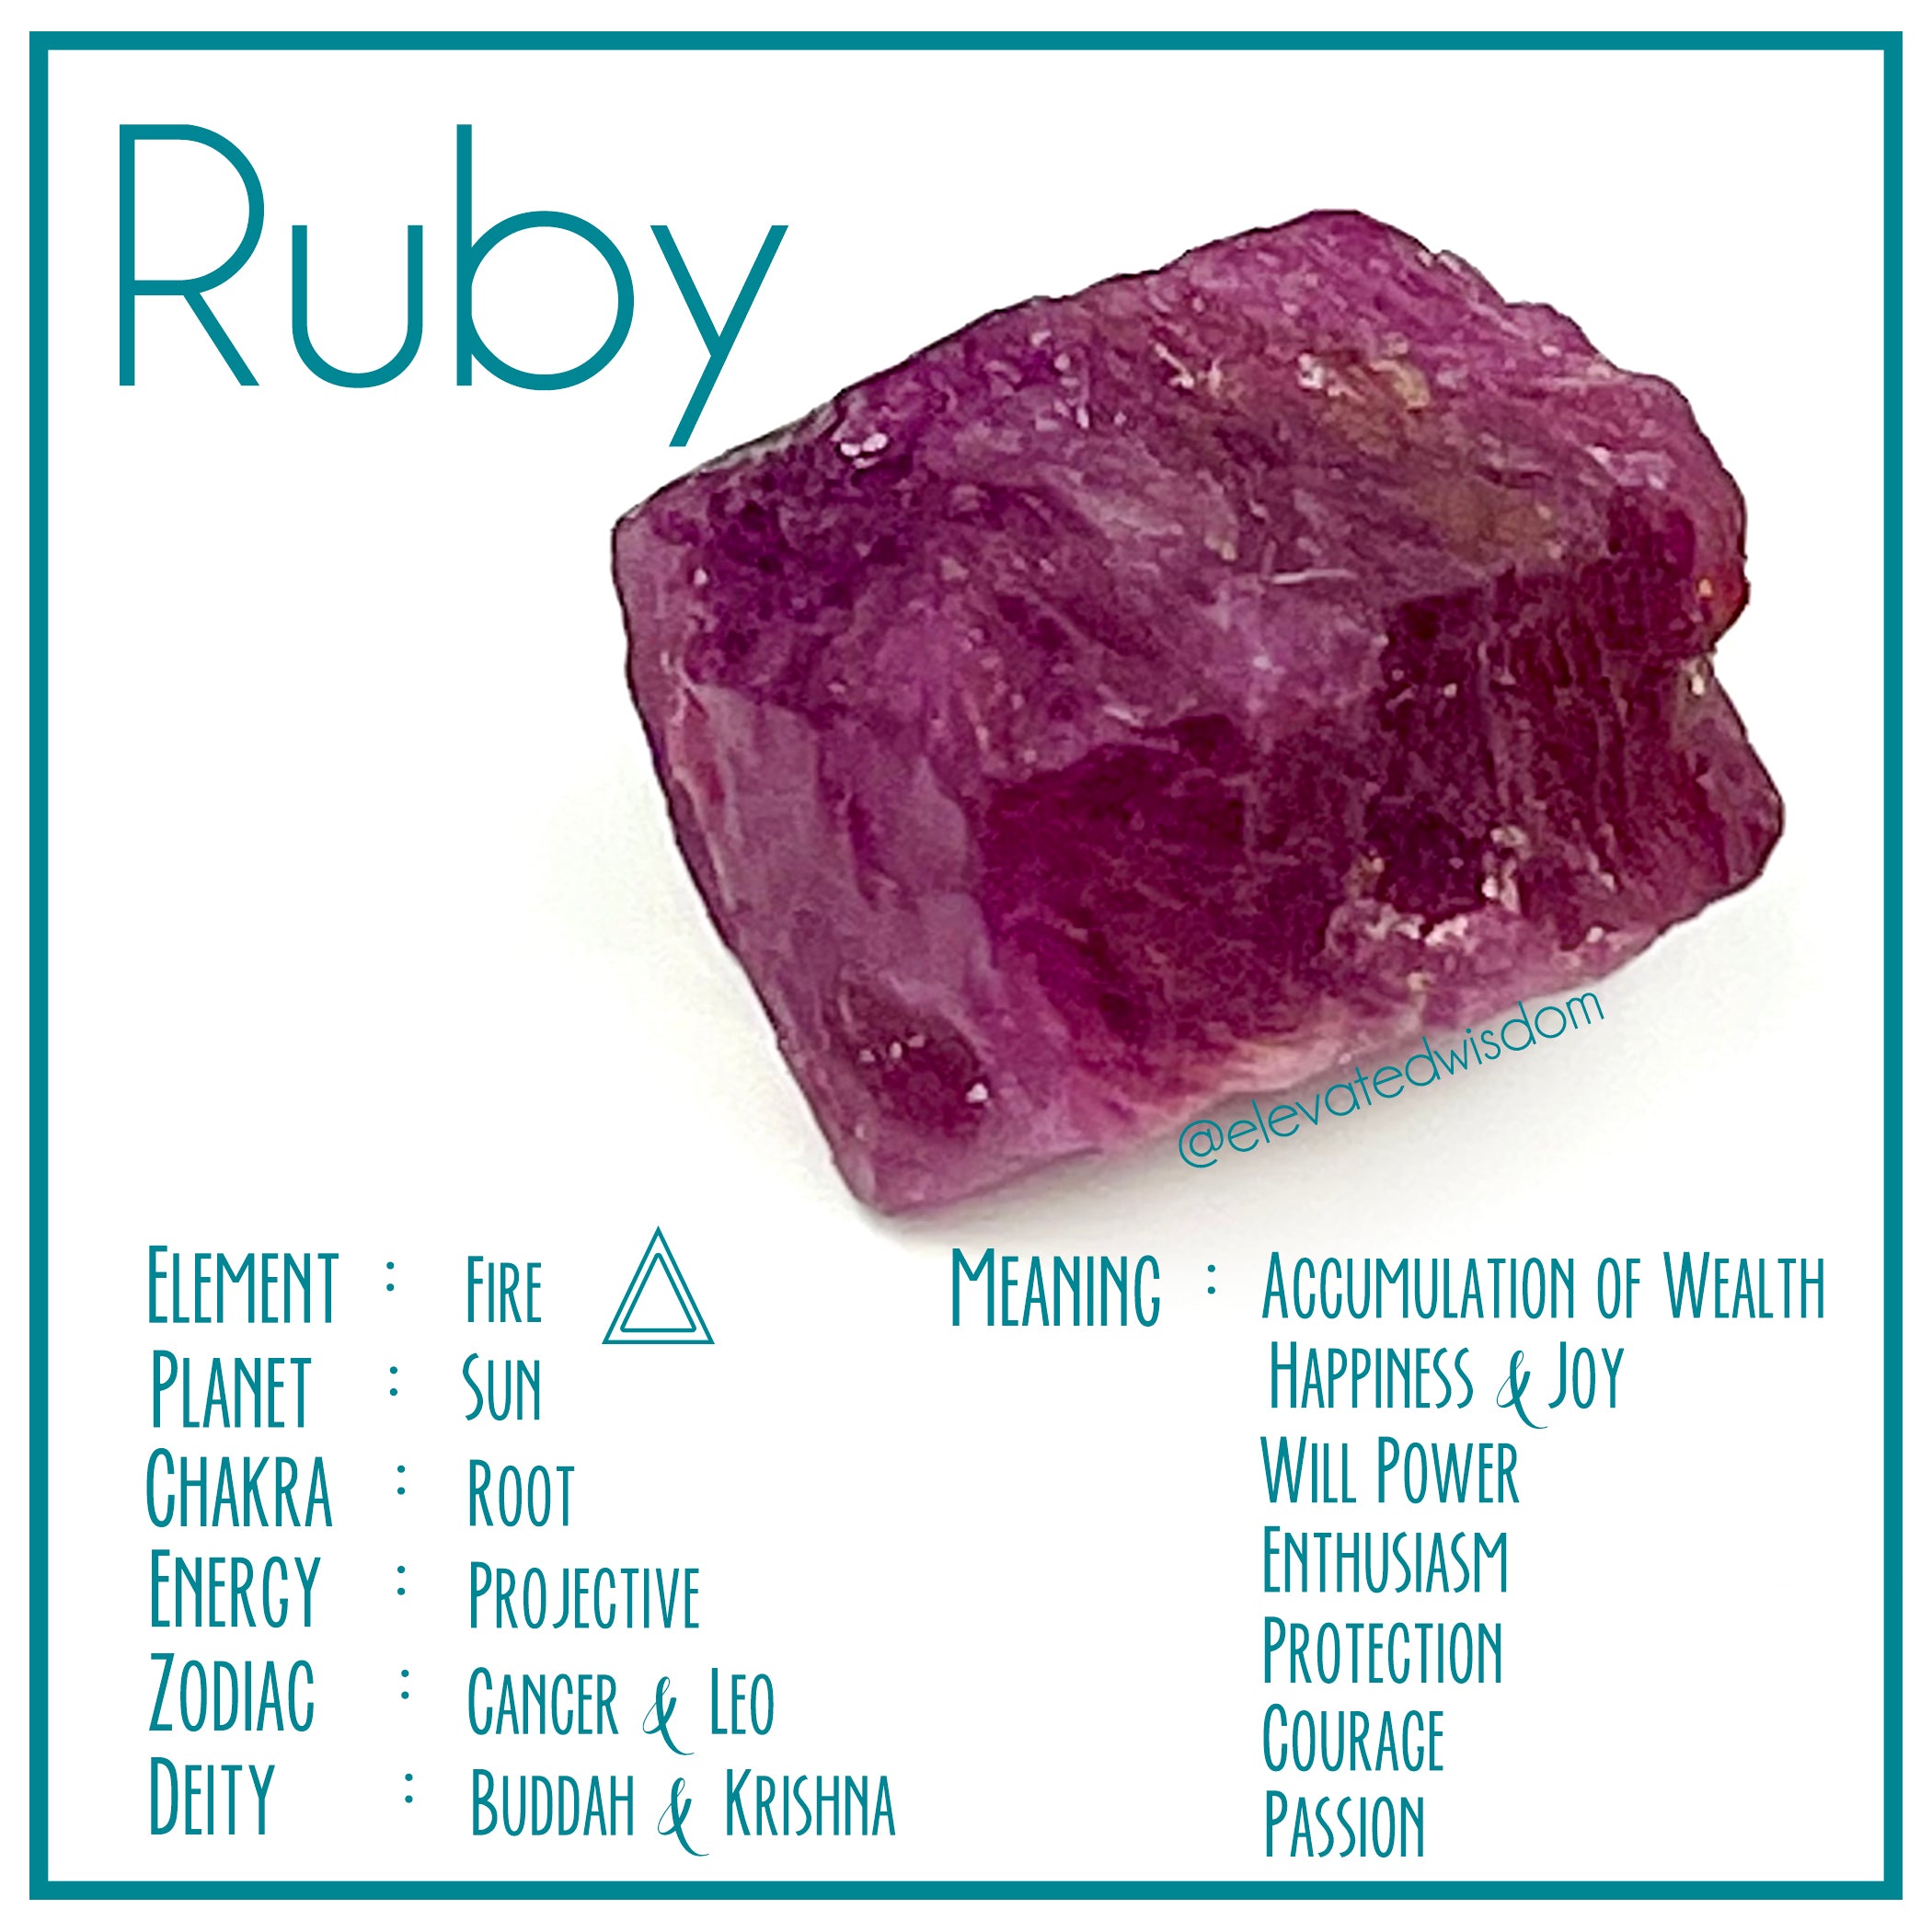 ruby stims! — level 9223372036854775807 (the true final level)